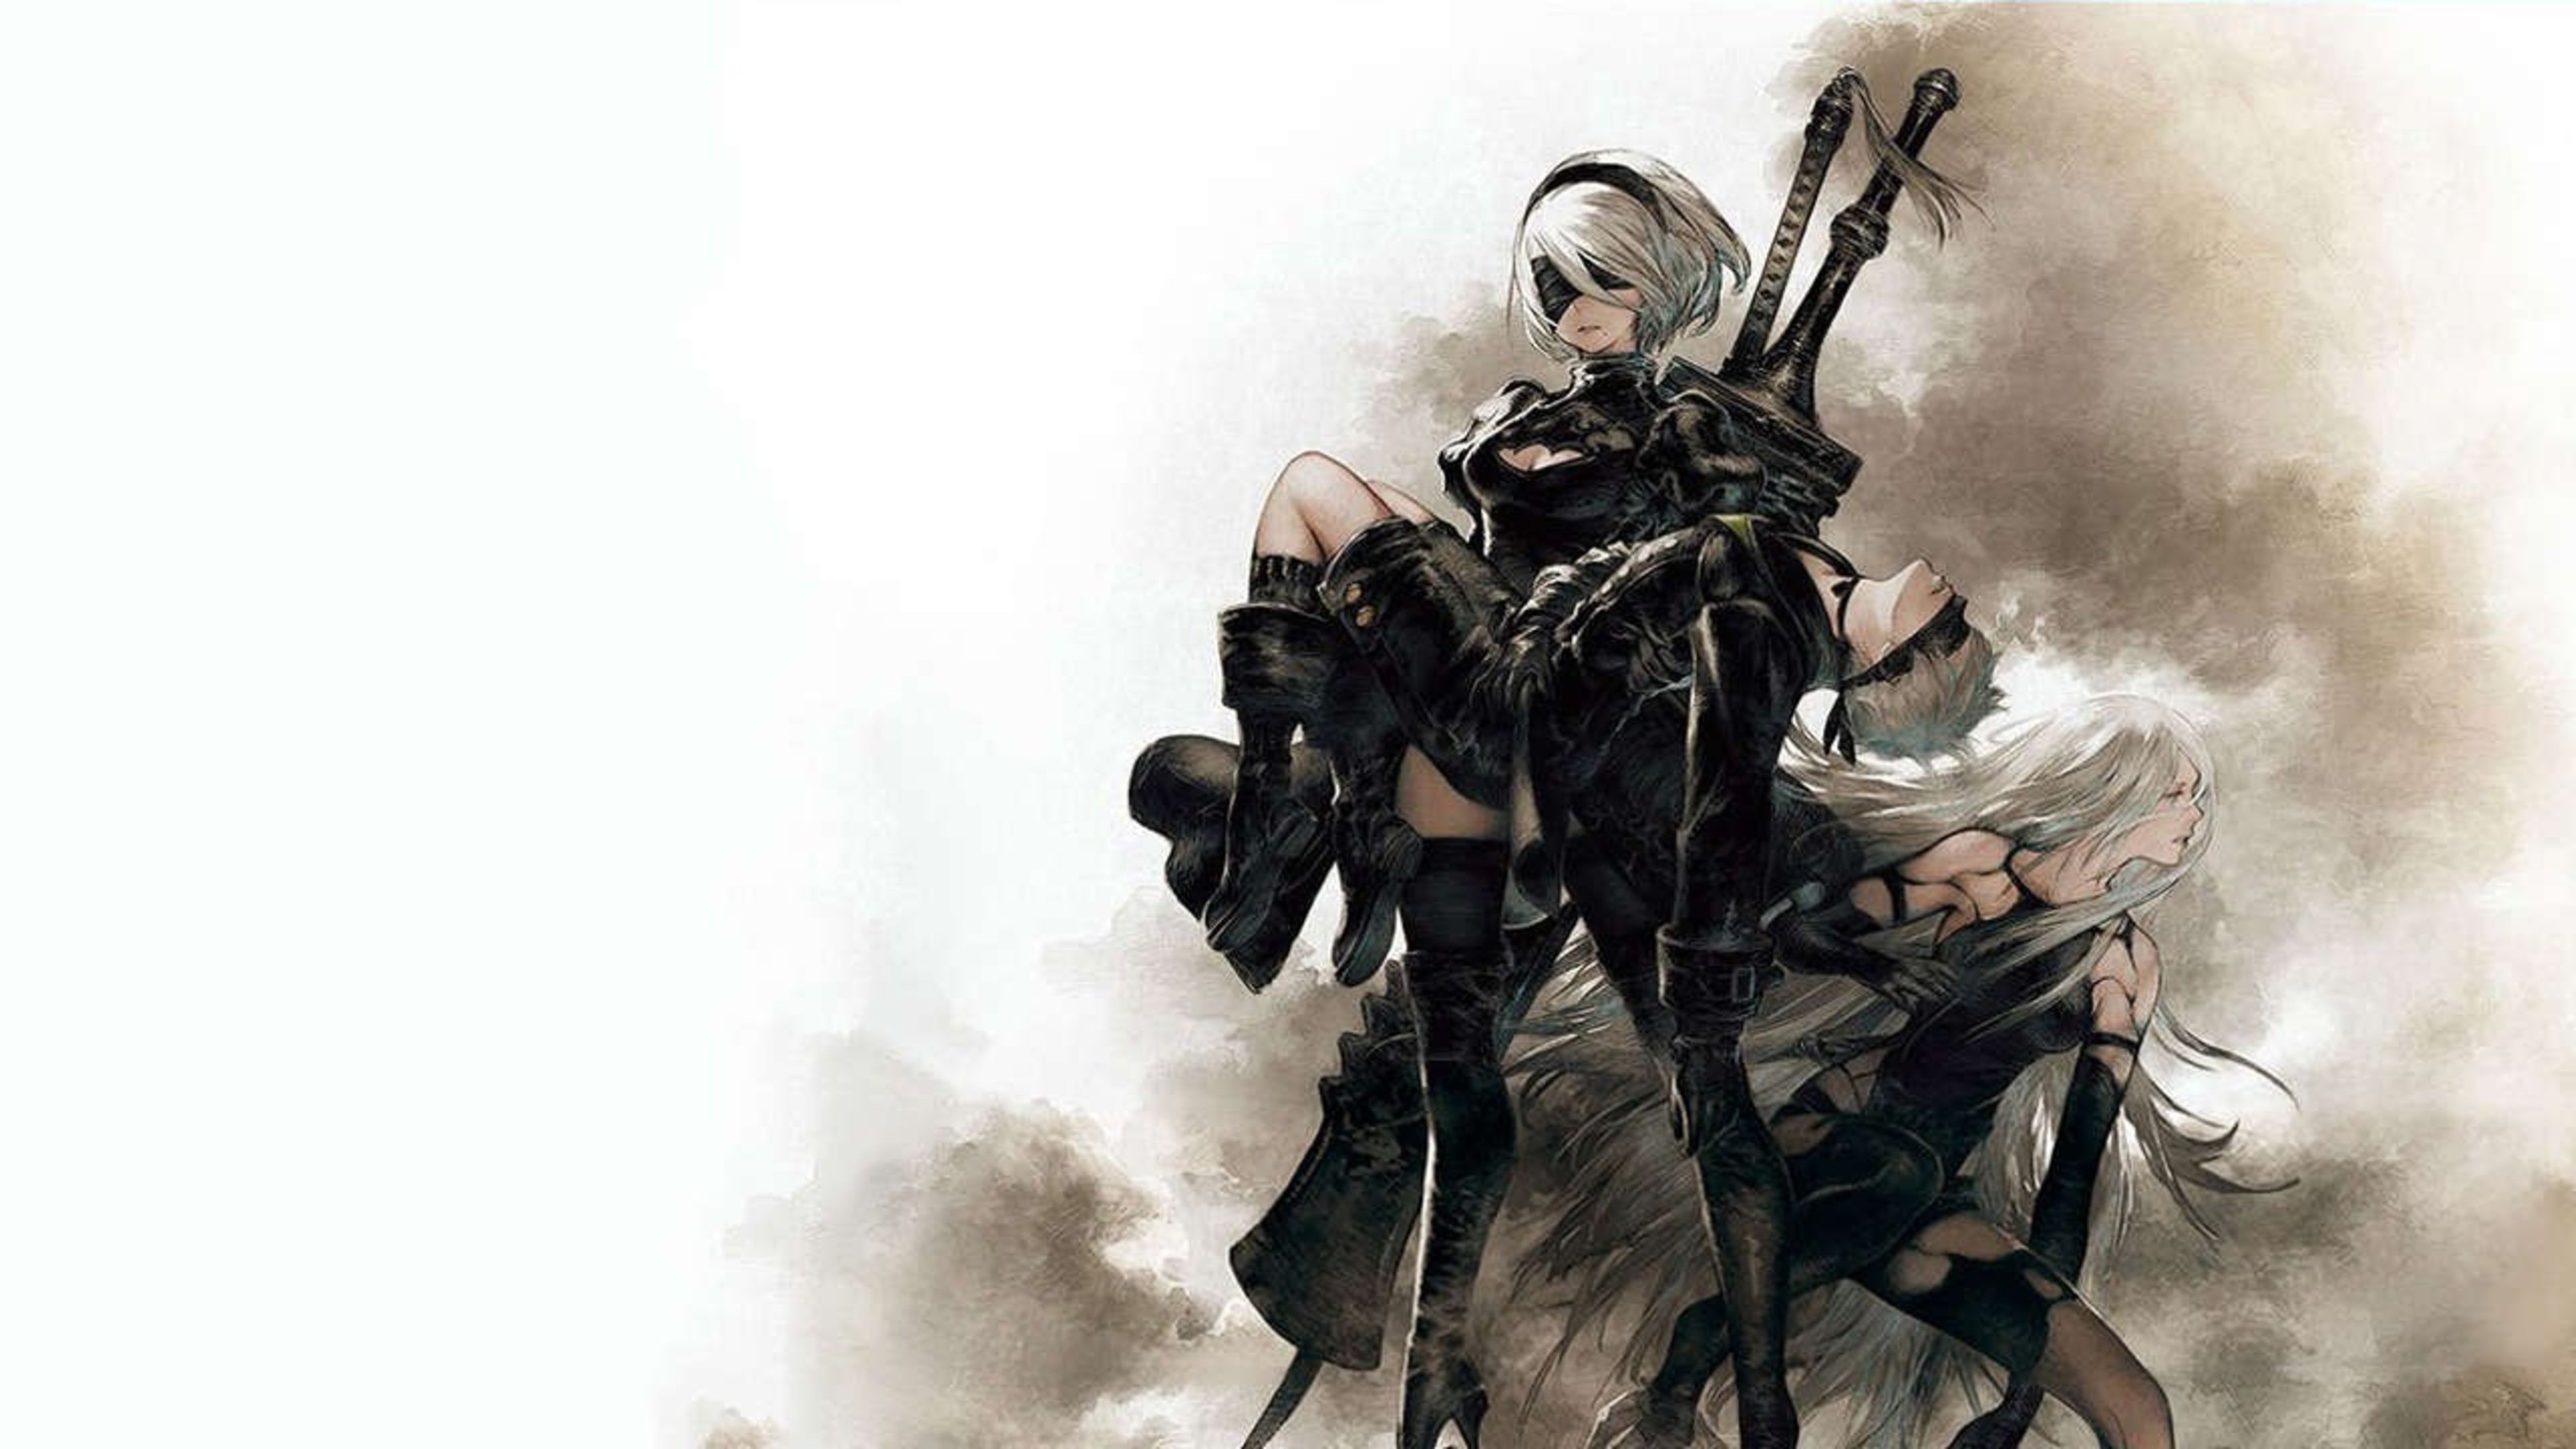 Nier nintendo switch. NIER:Automata the end of yorha Edition. NIER:Automata the end of yorha Edition Switch. Nintendo Switch NIER. NIER: Automata™ game of the yorha Edition.